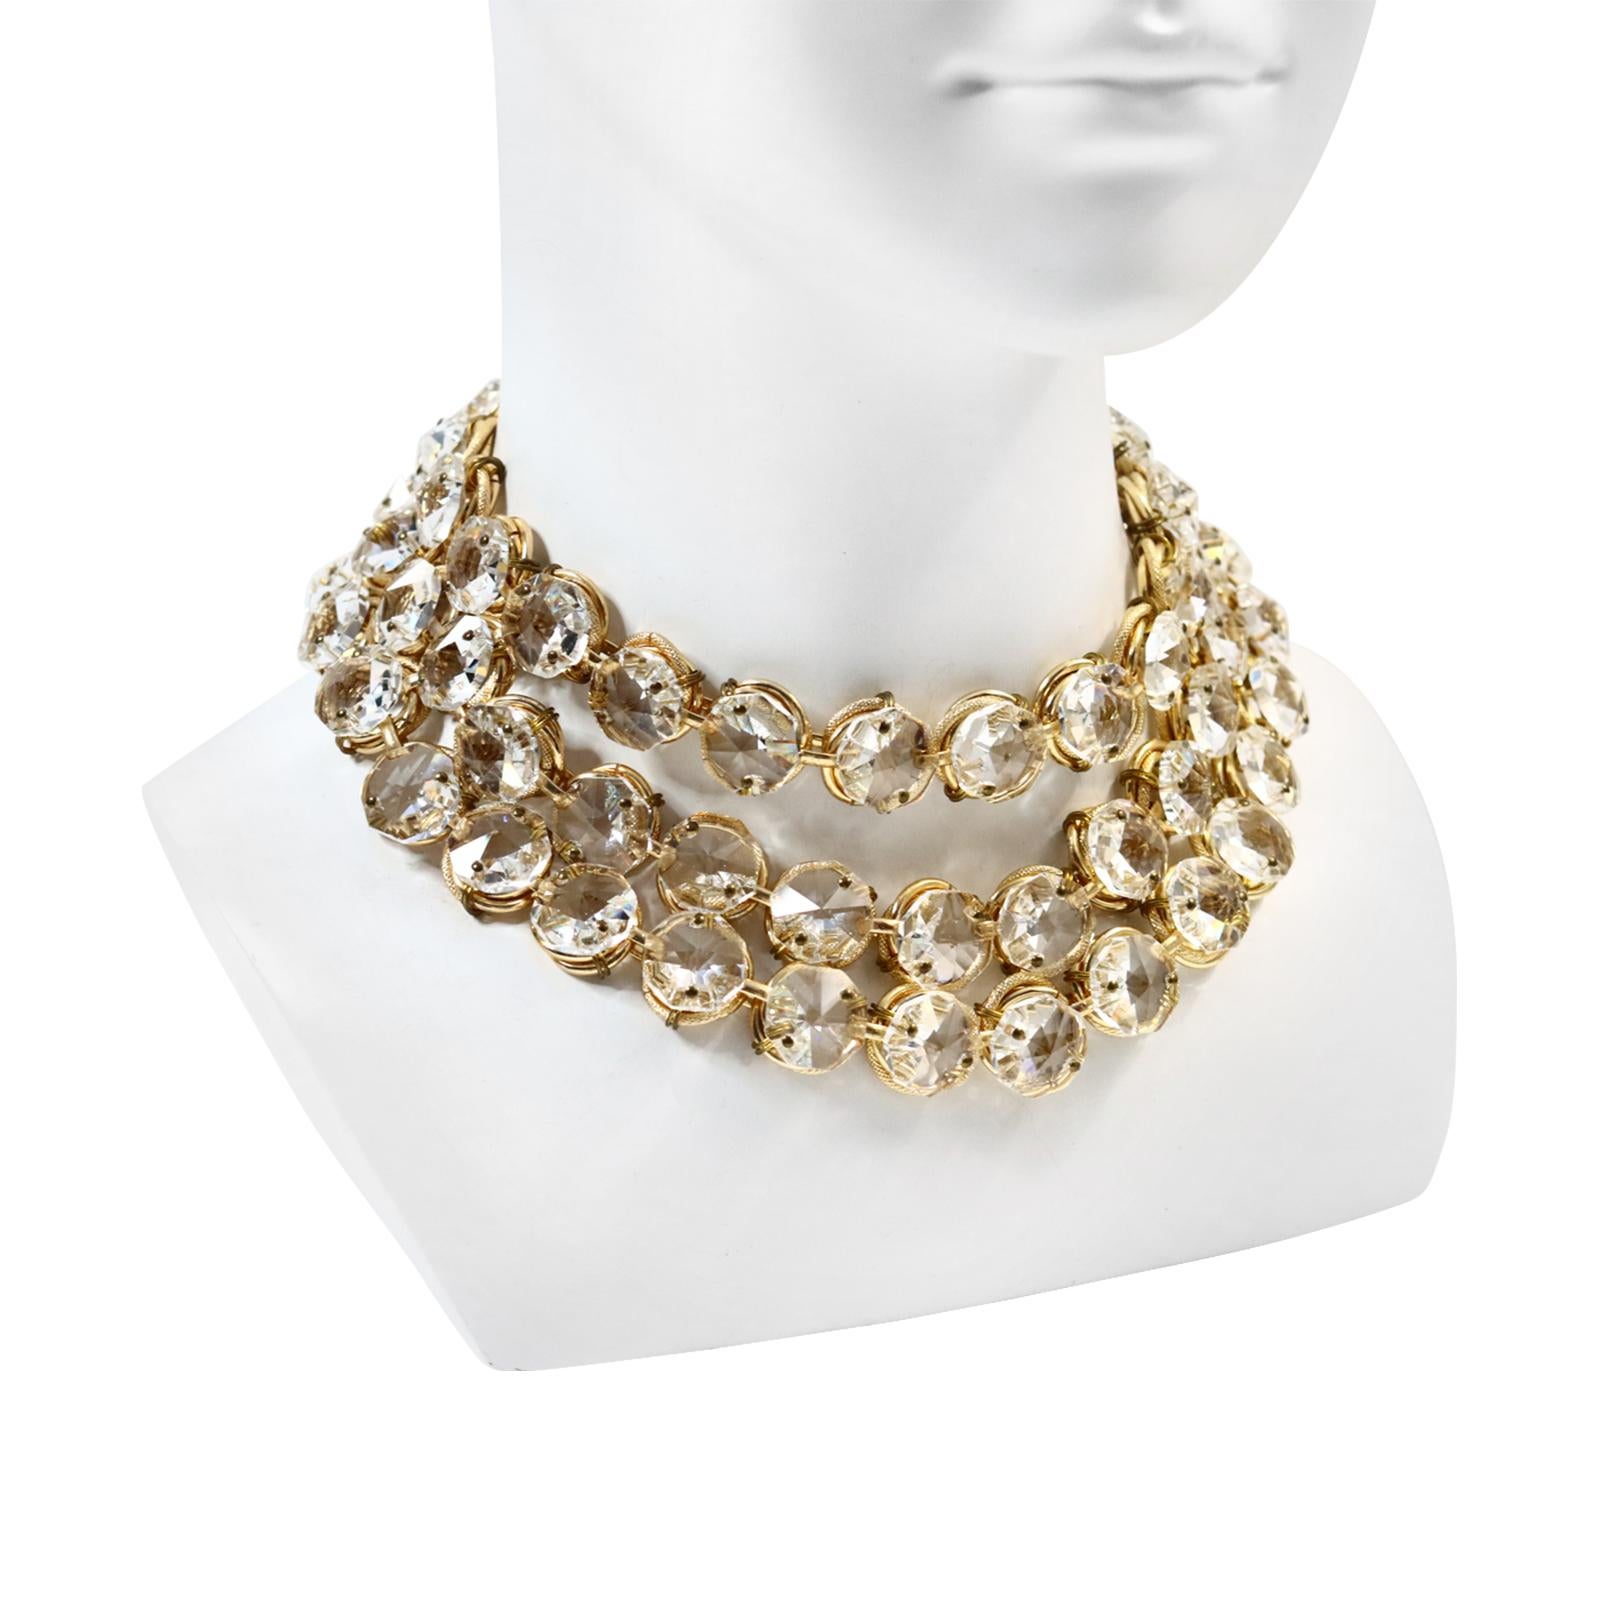 Vintage Poggi Paris Gold Tone with Large Crystals 3 Row Necklace, circa 1990s In Good Condition For Sale In New York, NY